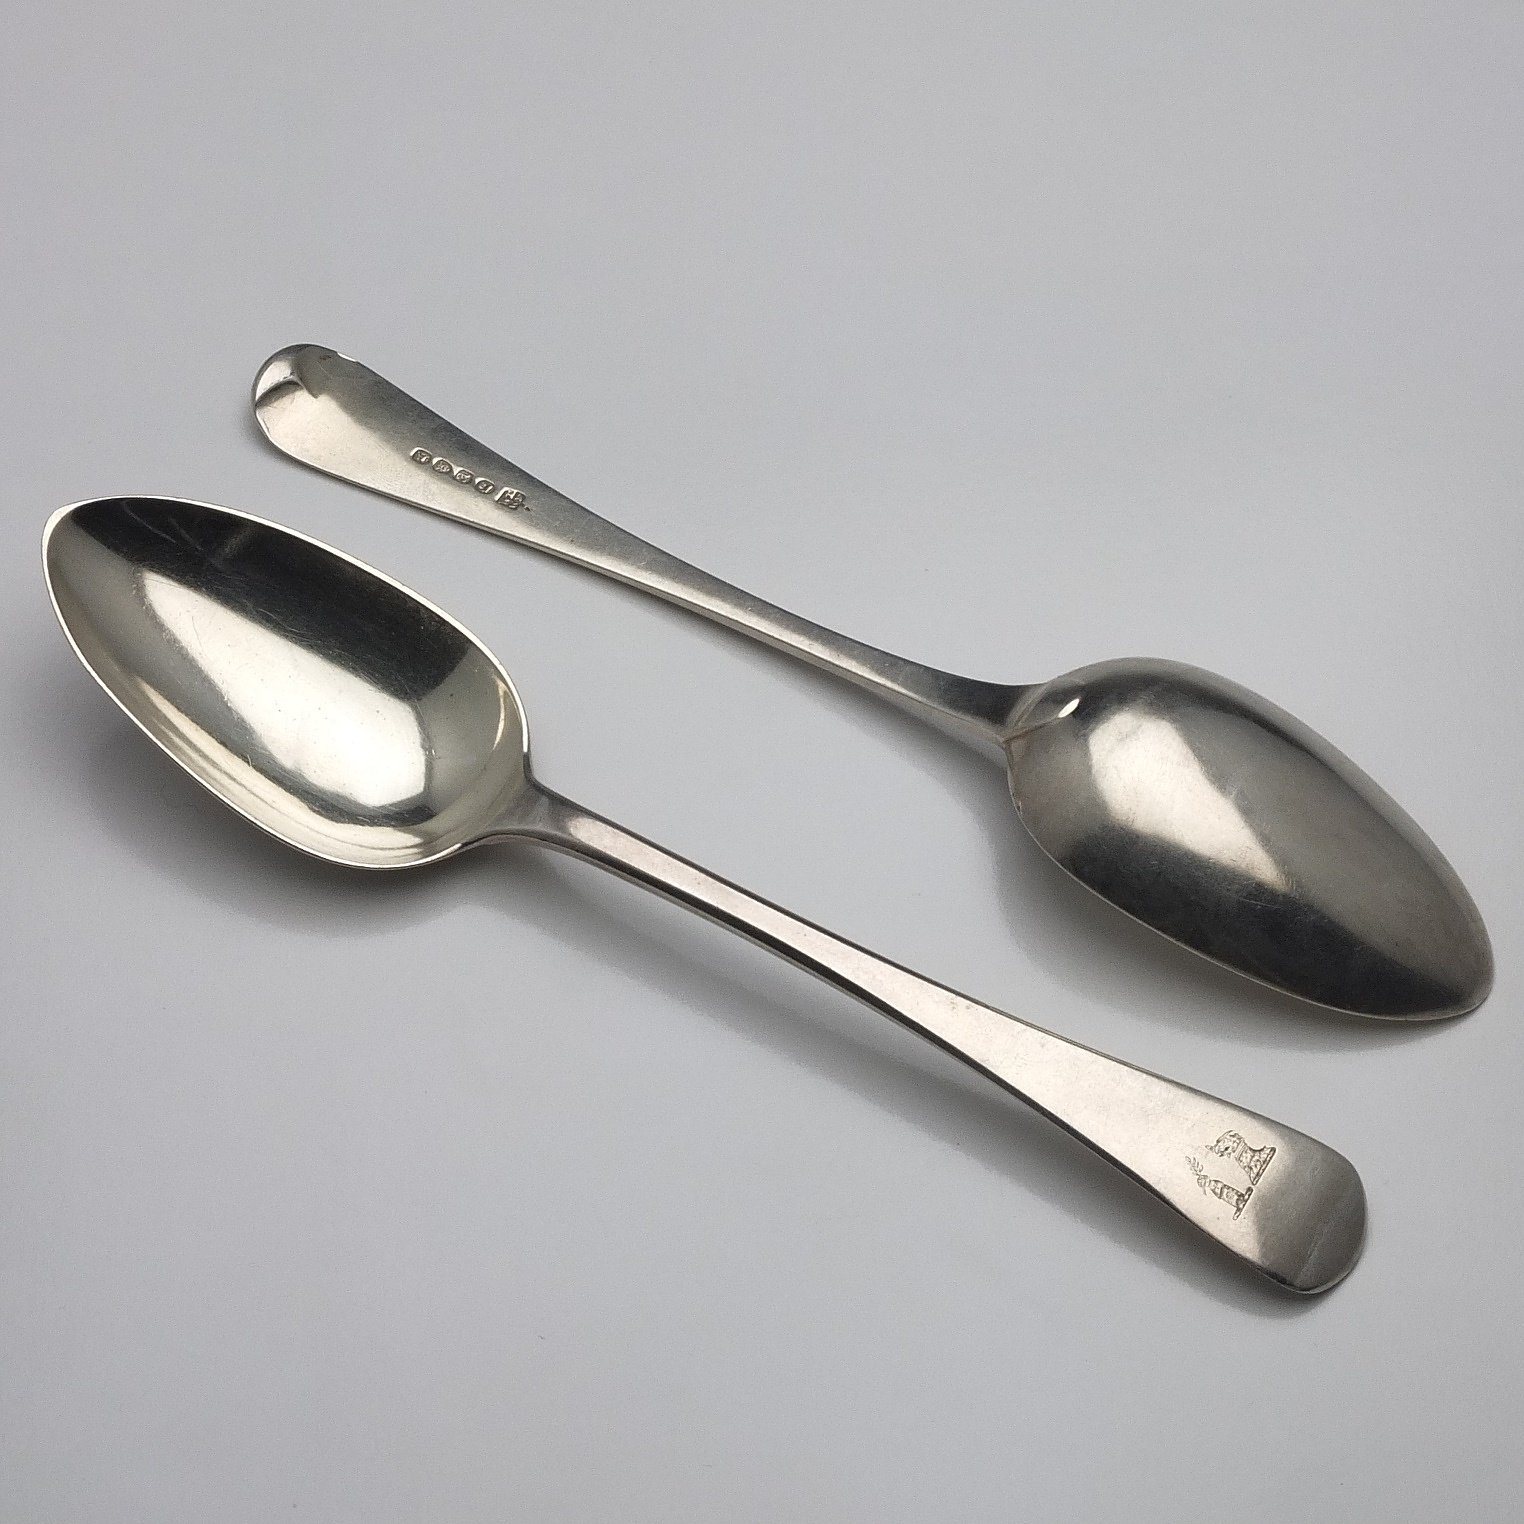 'Pair of George III Crested Sterling Silver Table Spoons William Eley & William Fearn London 1816'